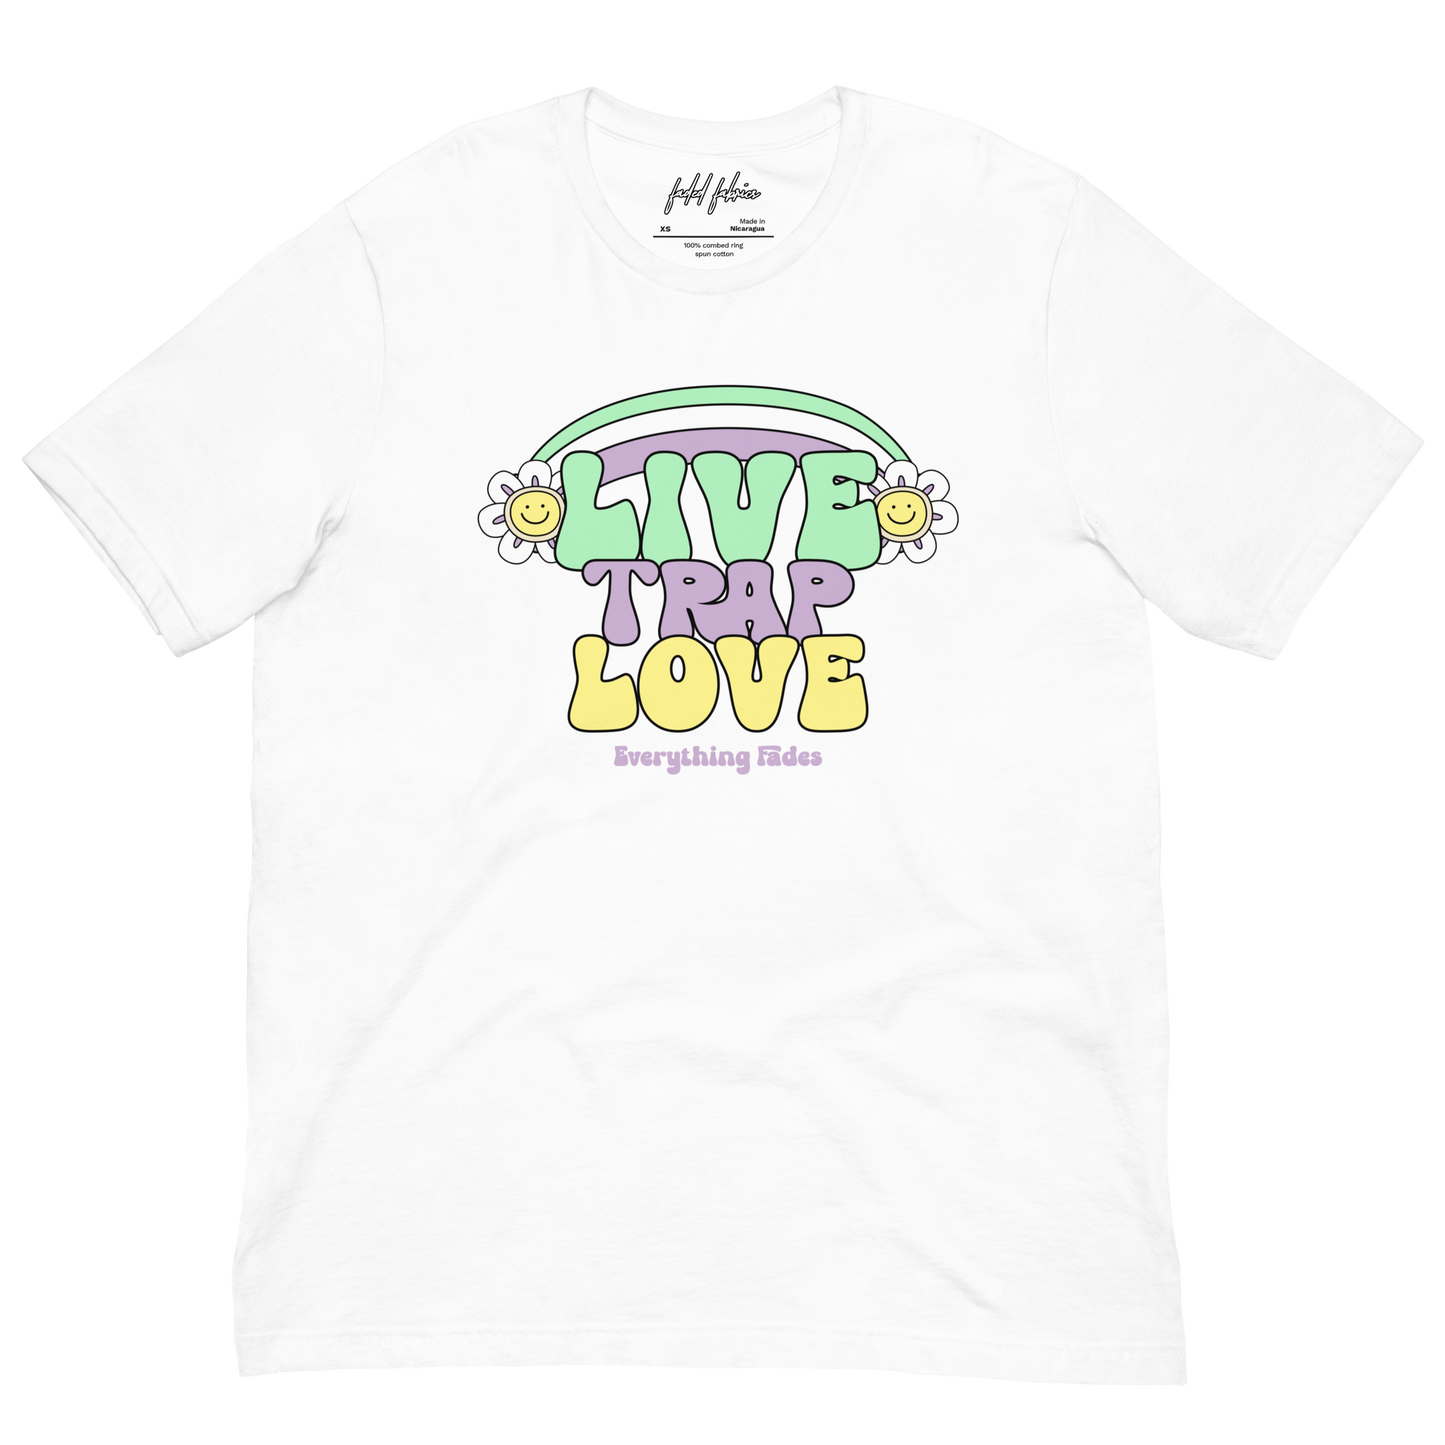 Live Trap Love (Everything Fades) Unisex T-Shirt